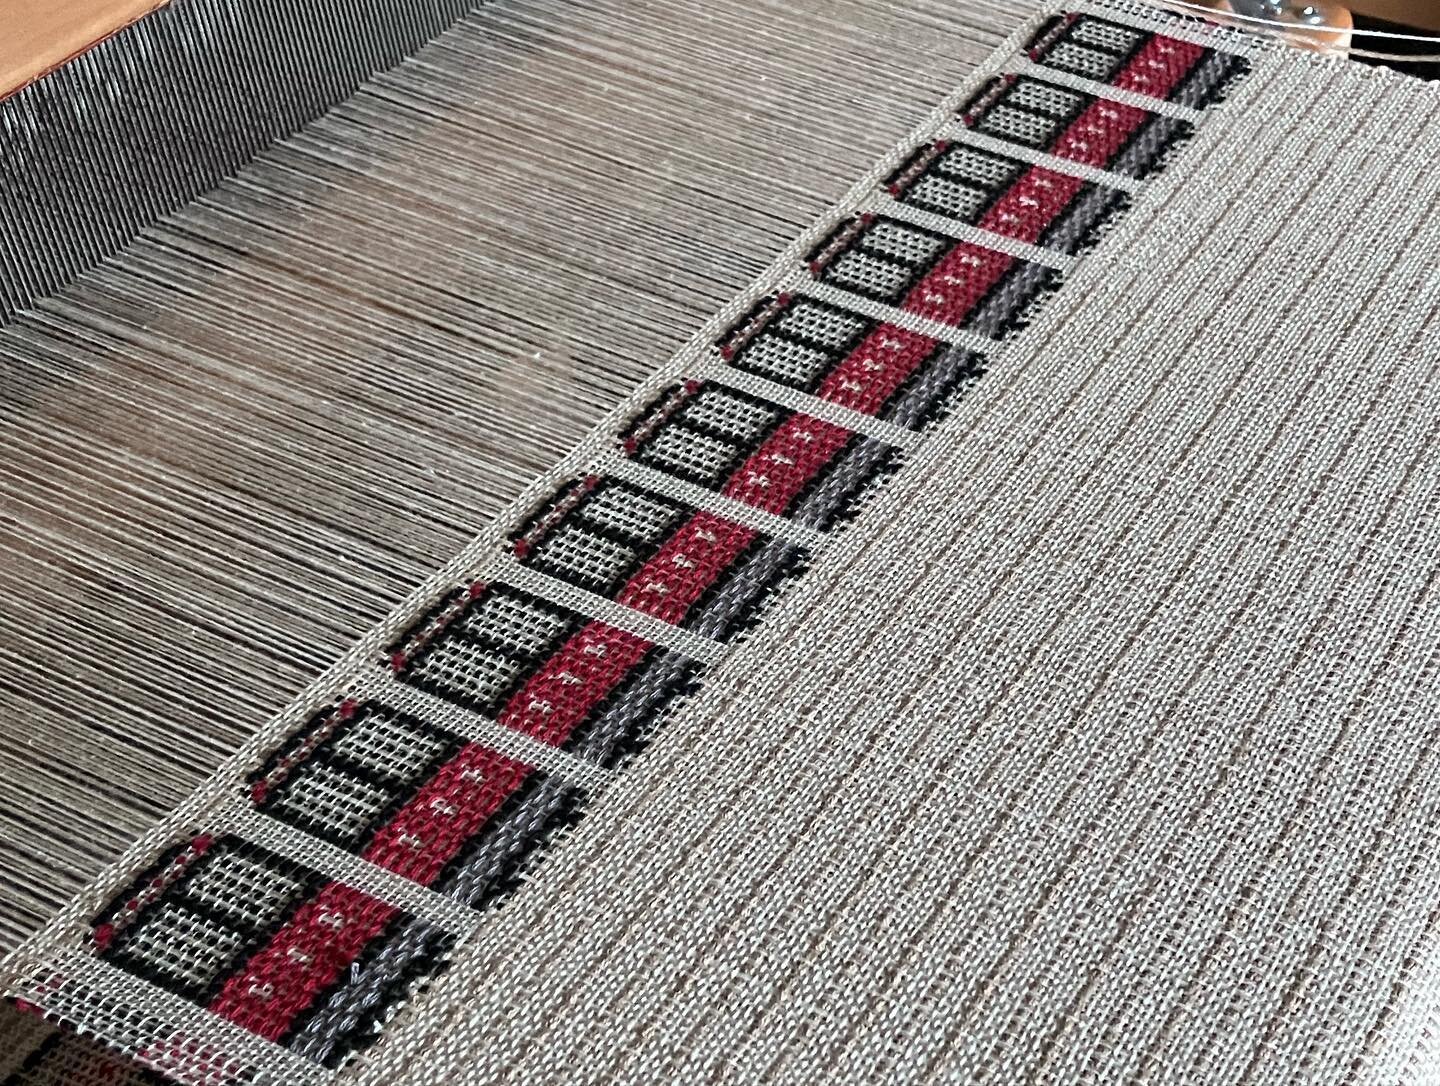 A short run of my TeaTeaC towels on the loom for a custom order.
Although, as a passenger, hearing the streetcar driver announce &ldquo;short run&rdquo; is much dreaded, as passengers need to get out of their warm seats and stand at the stop, waiting